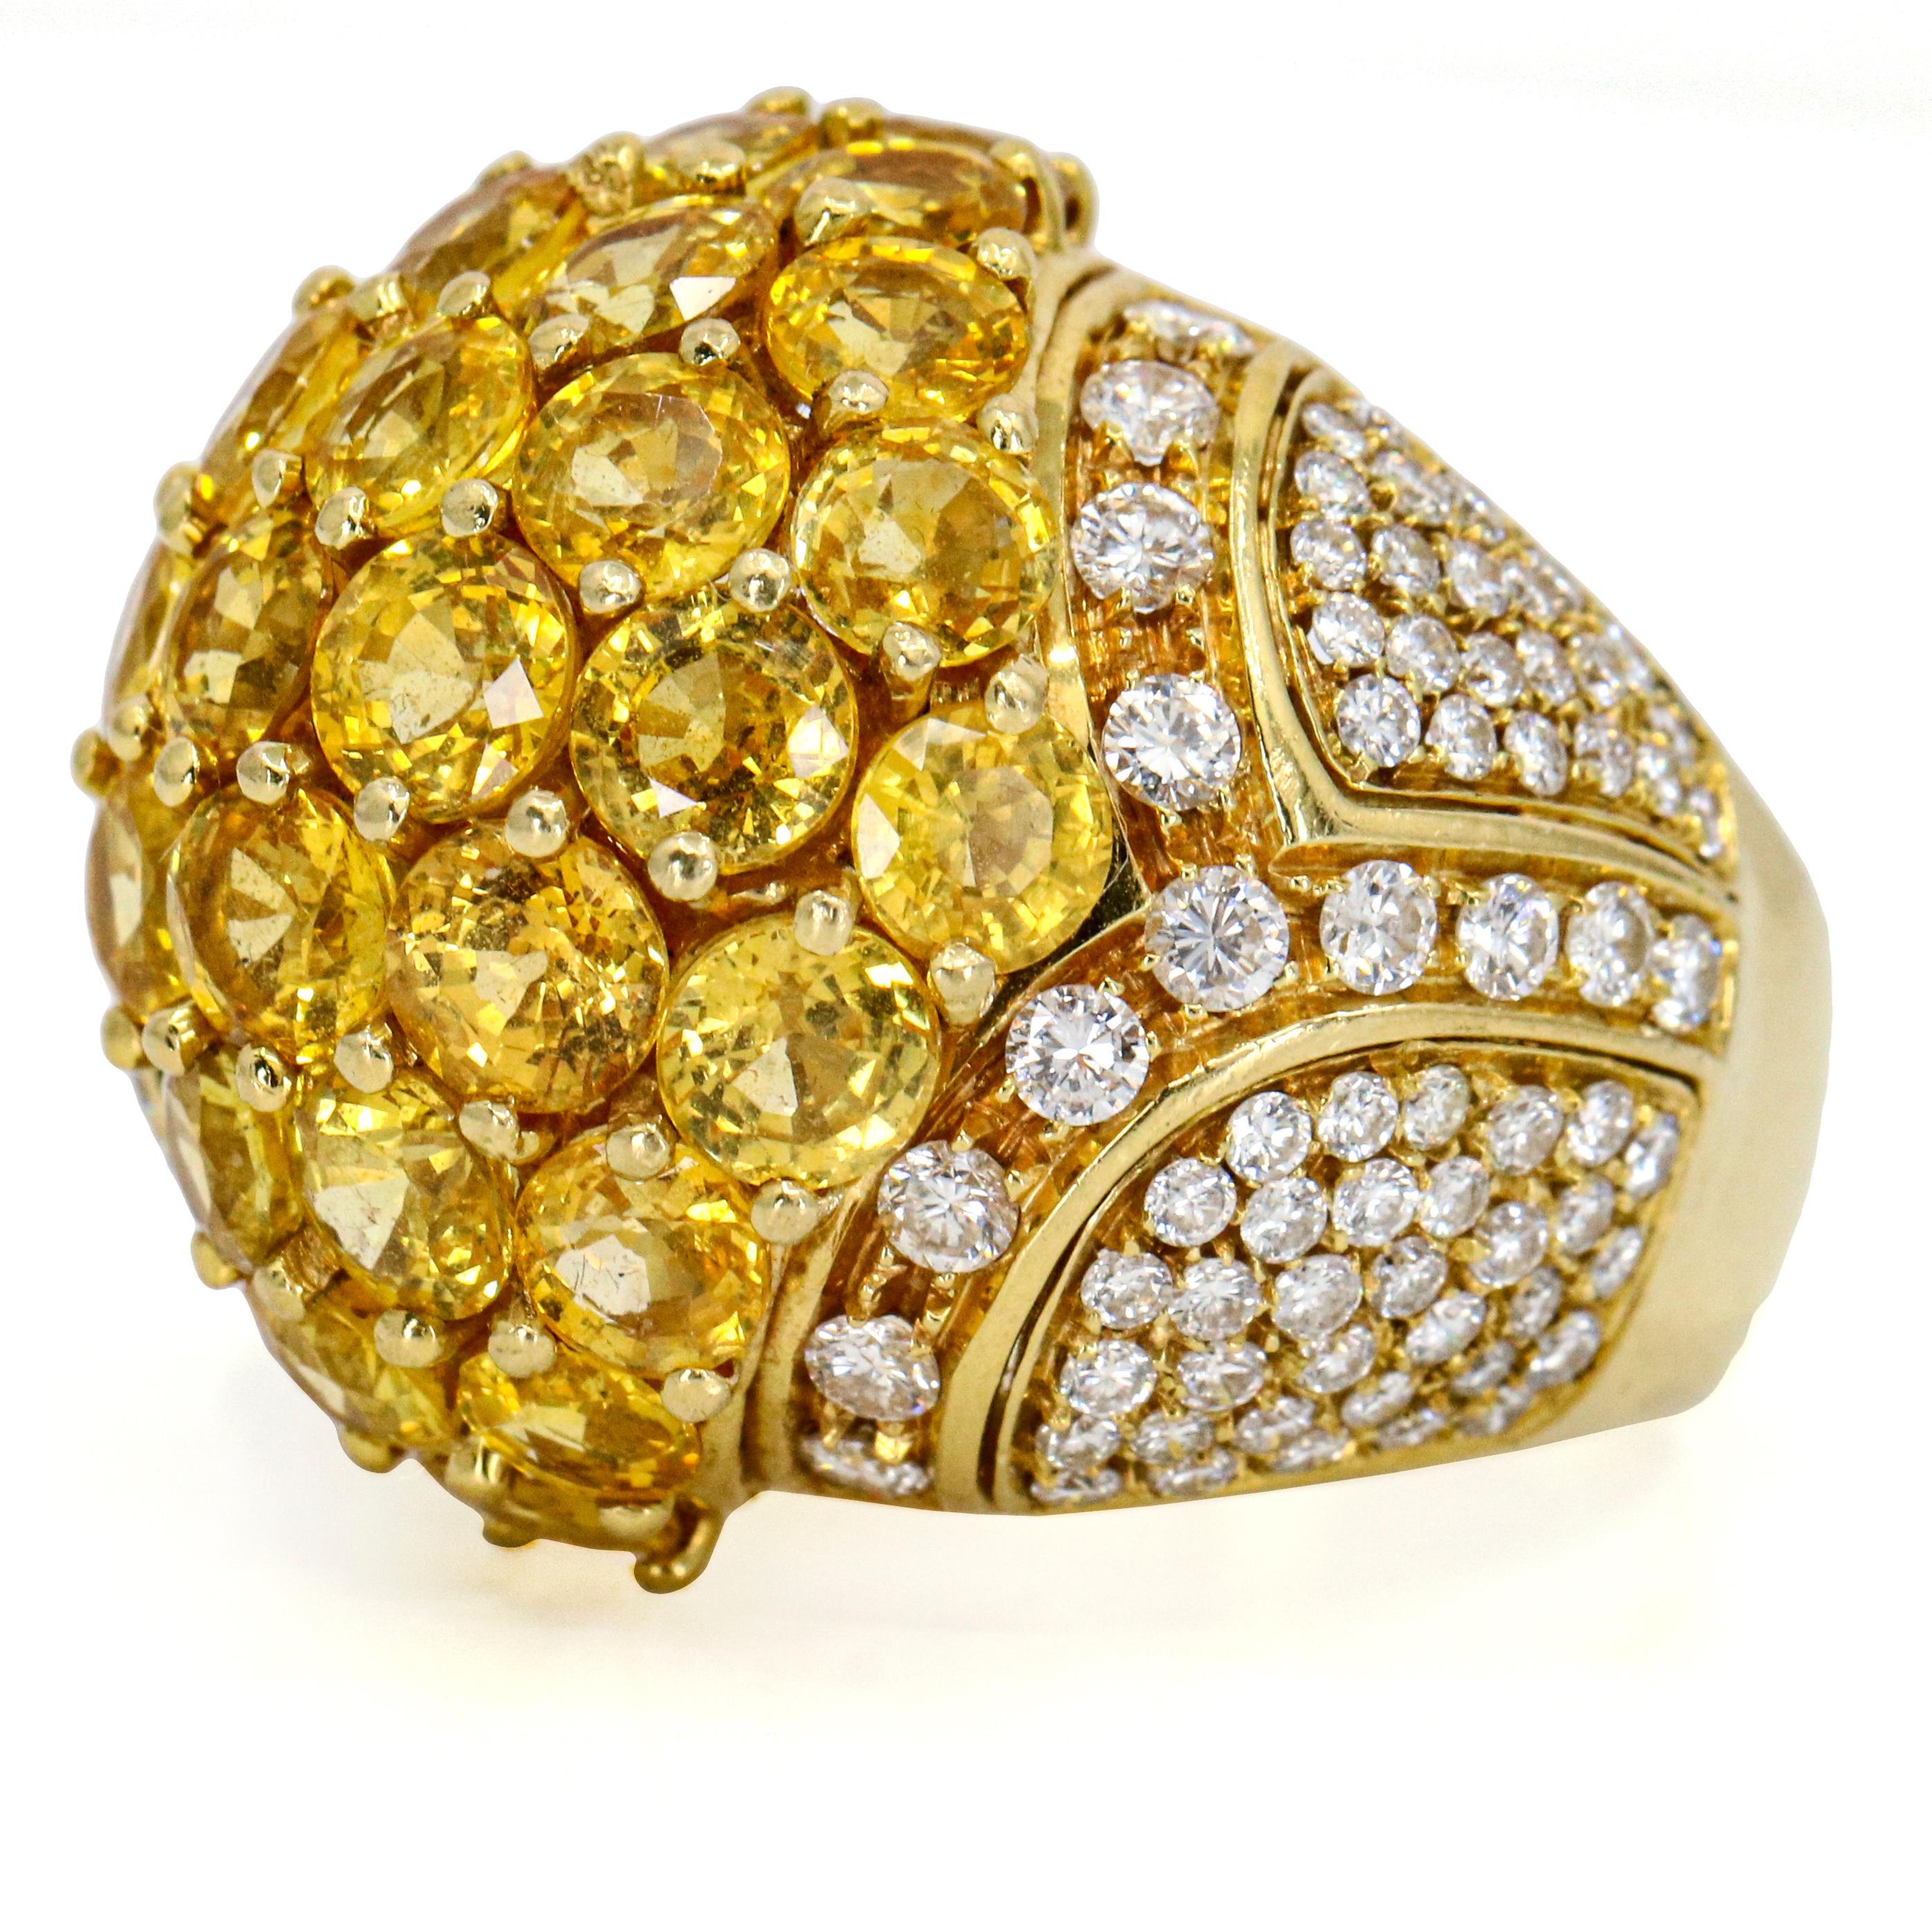 5.05 Carat 18 Karat Gold Yellow Sapphire Diamond Dome Ring In Excellent Condition For Sale In Fort Lauderdale, FL